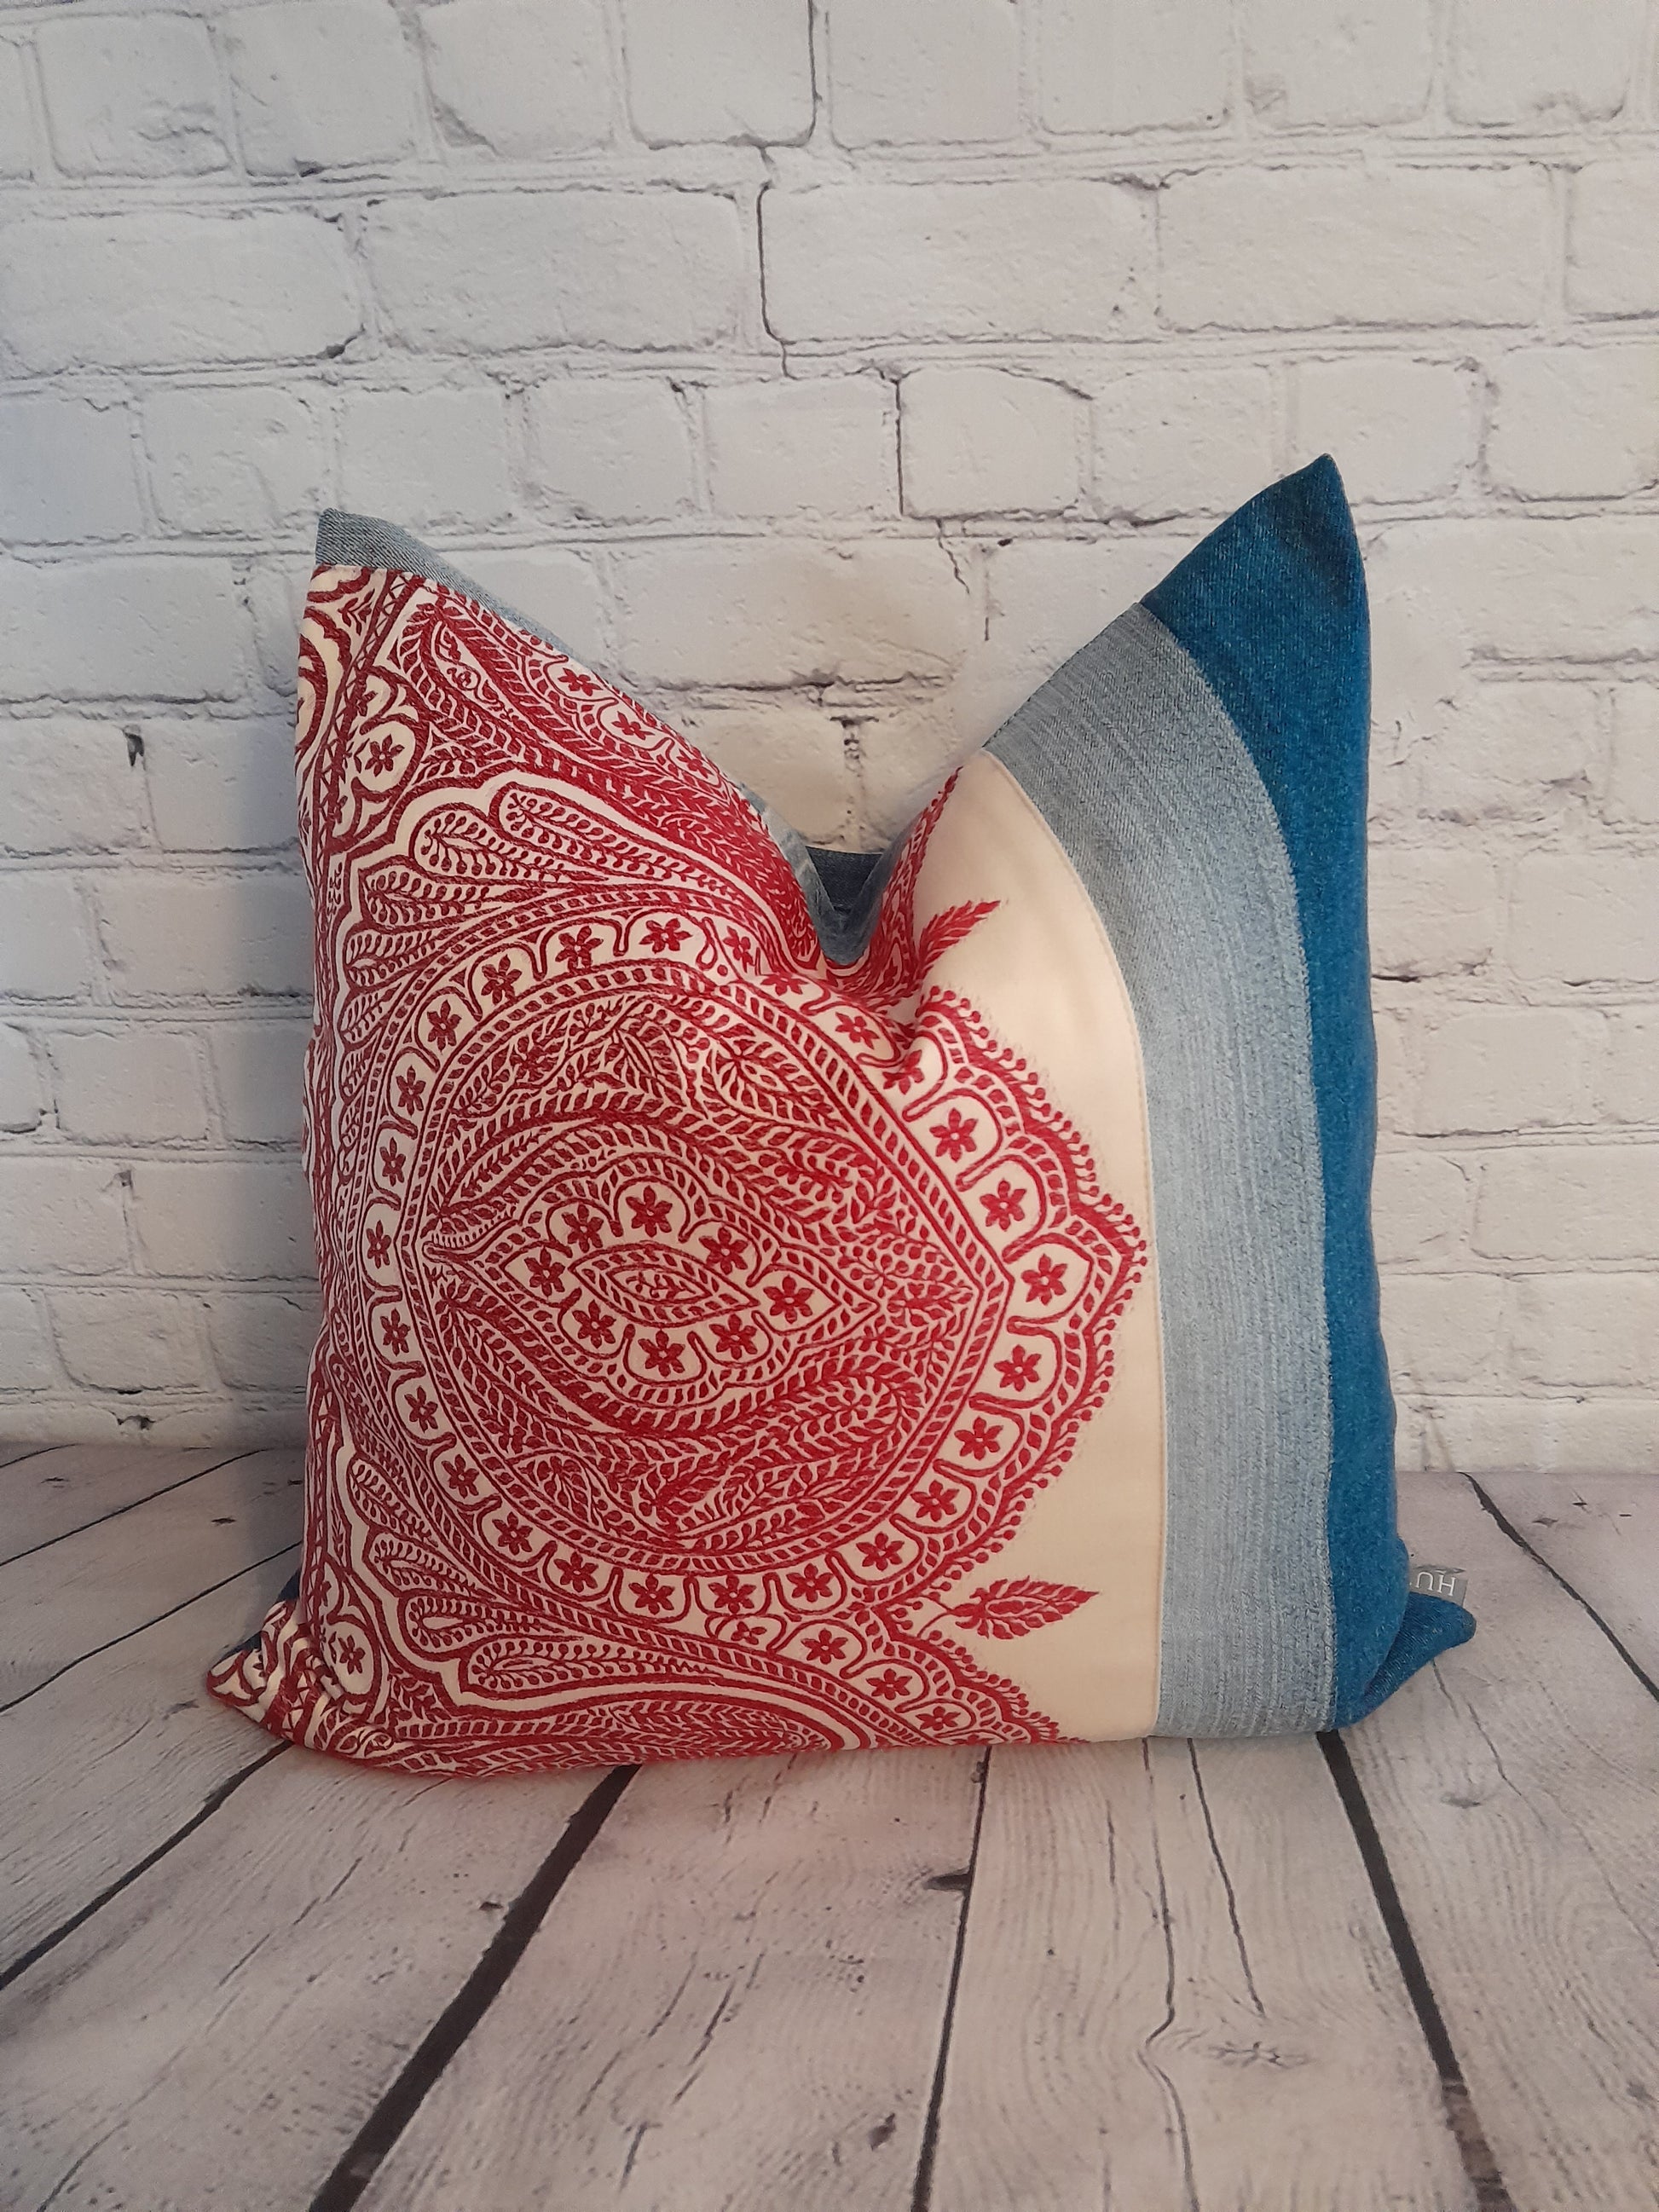 Repurposed denim cushion with boho red embroidered fabric